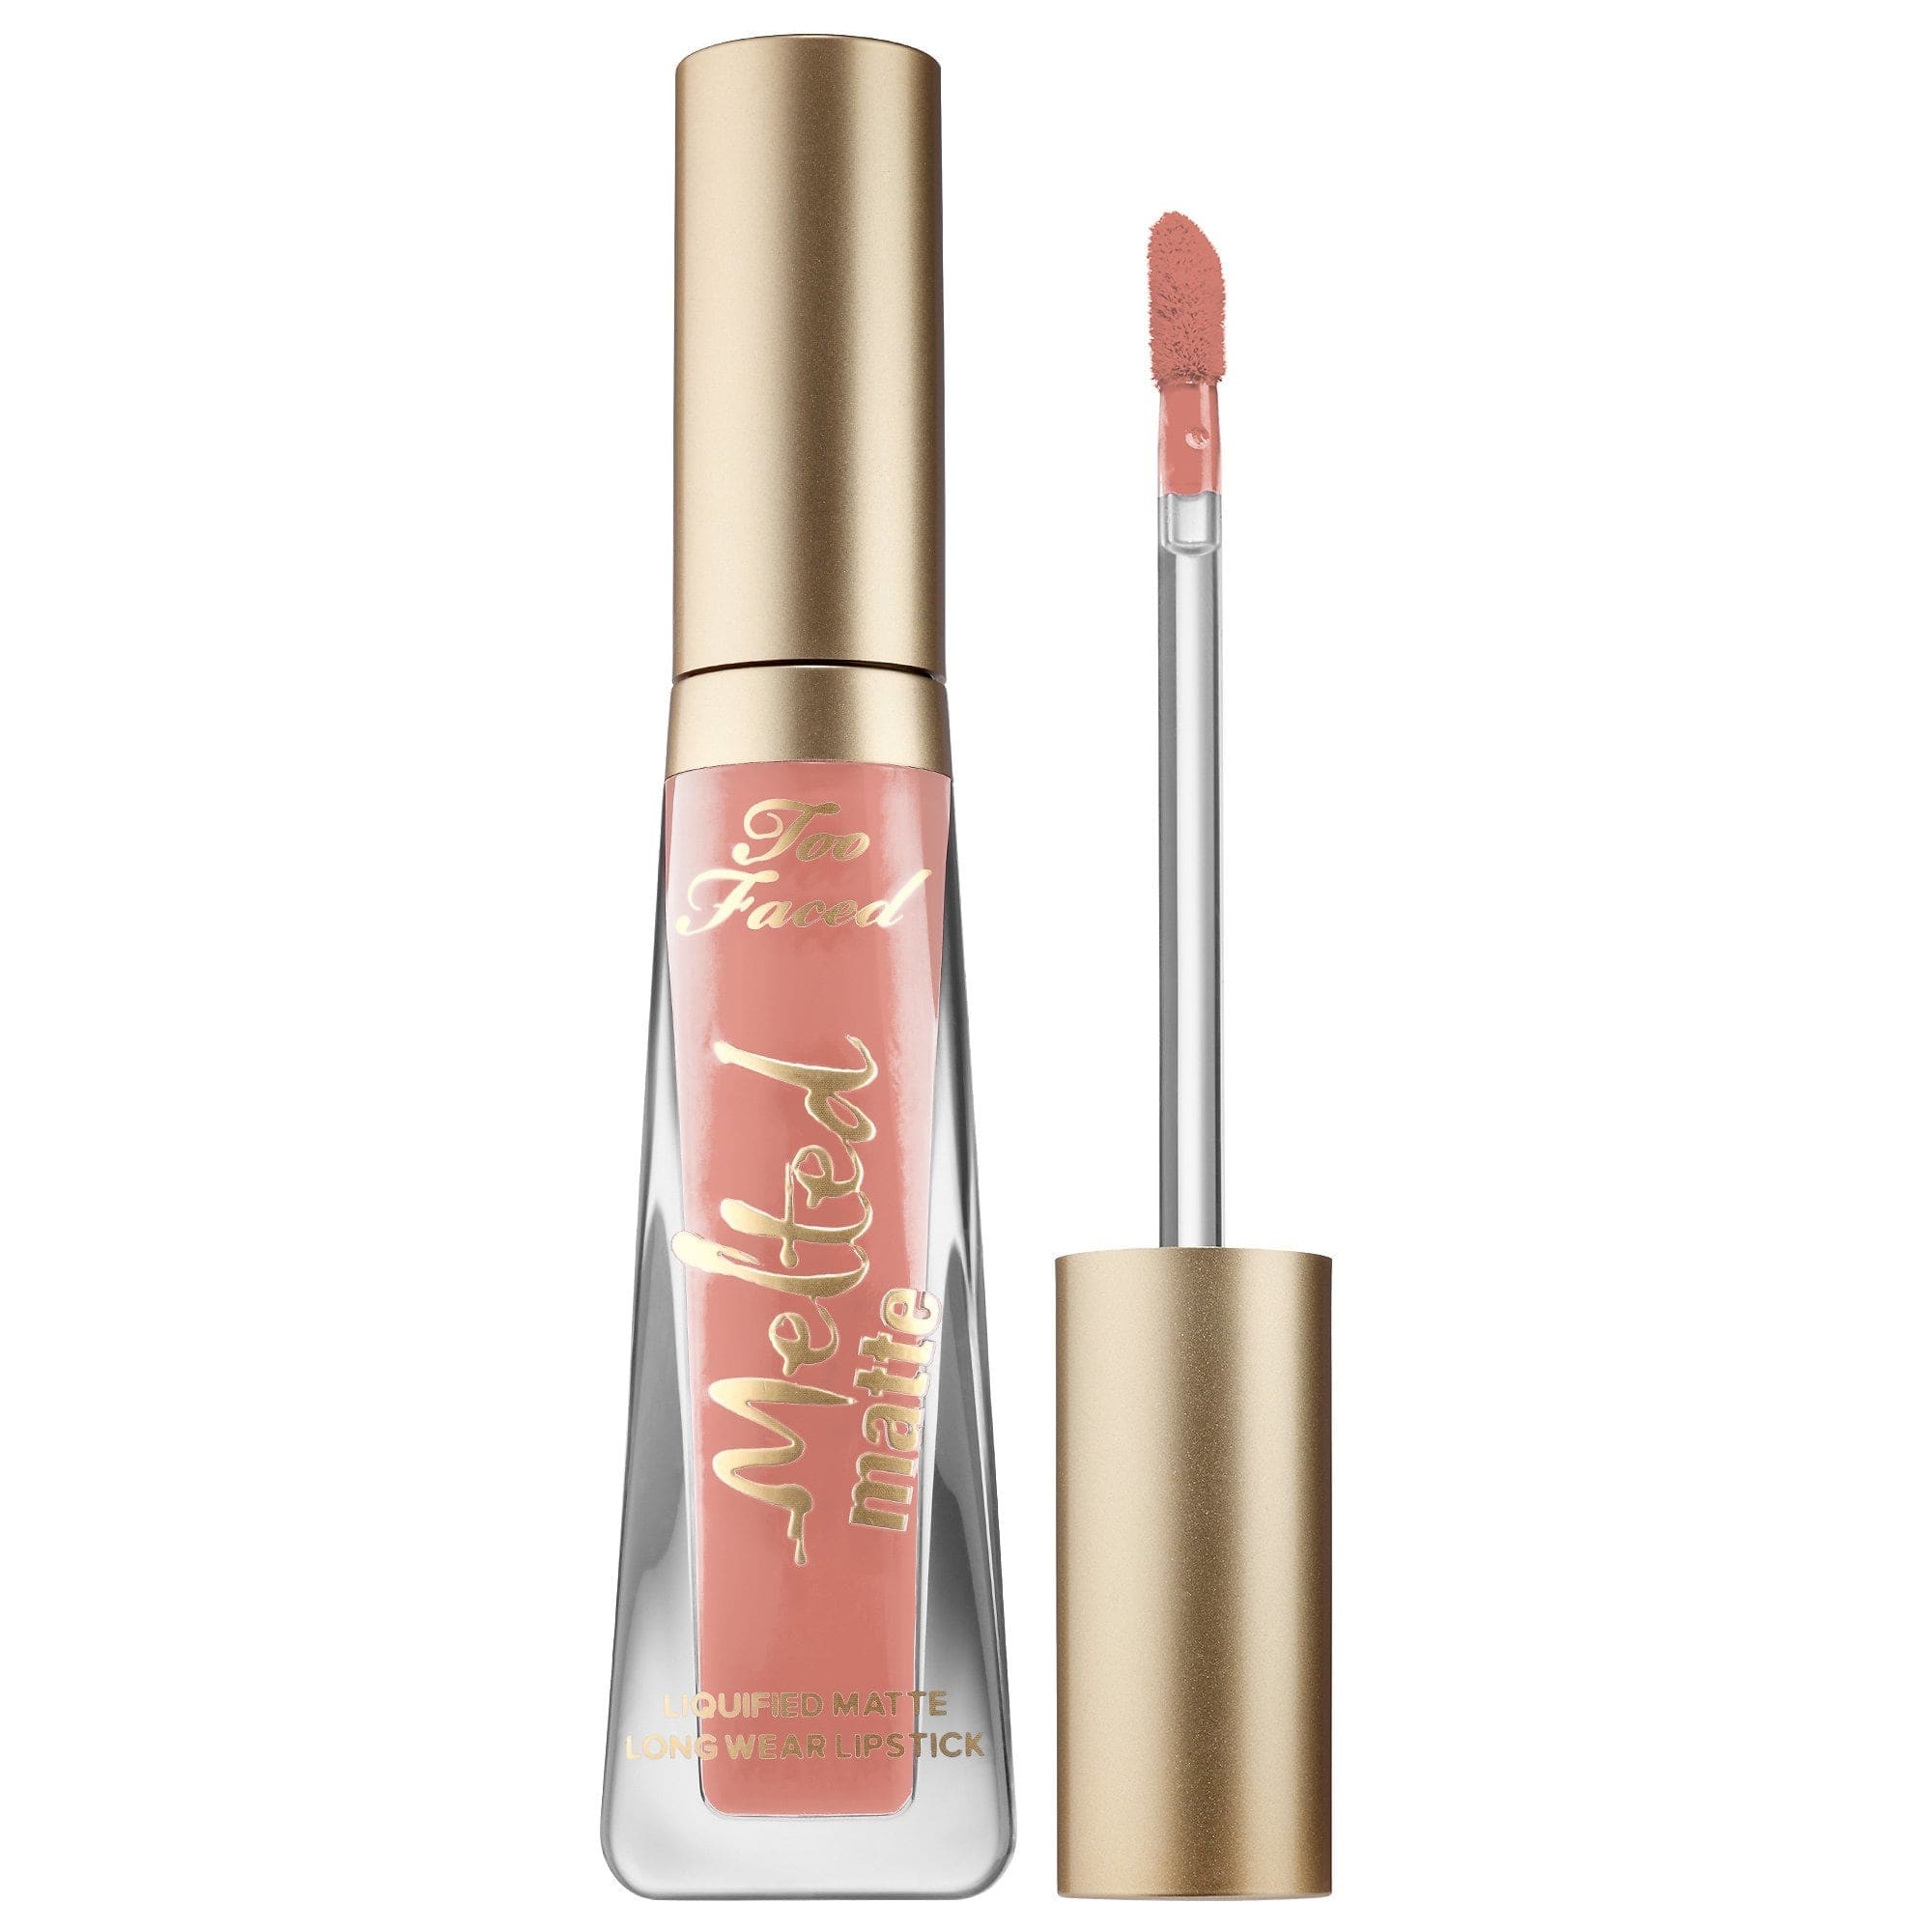 Too Faced Melted Matte Liquified Long Wear Matte Lipstick Miso Pretty